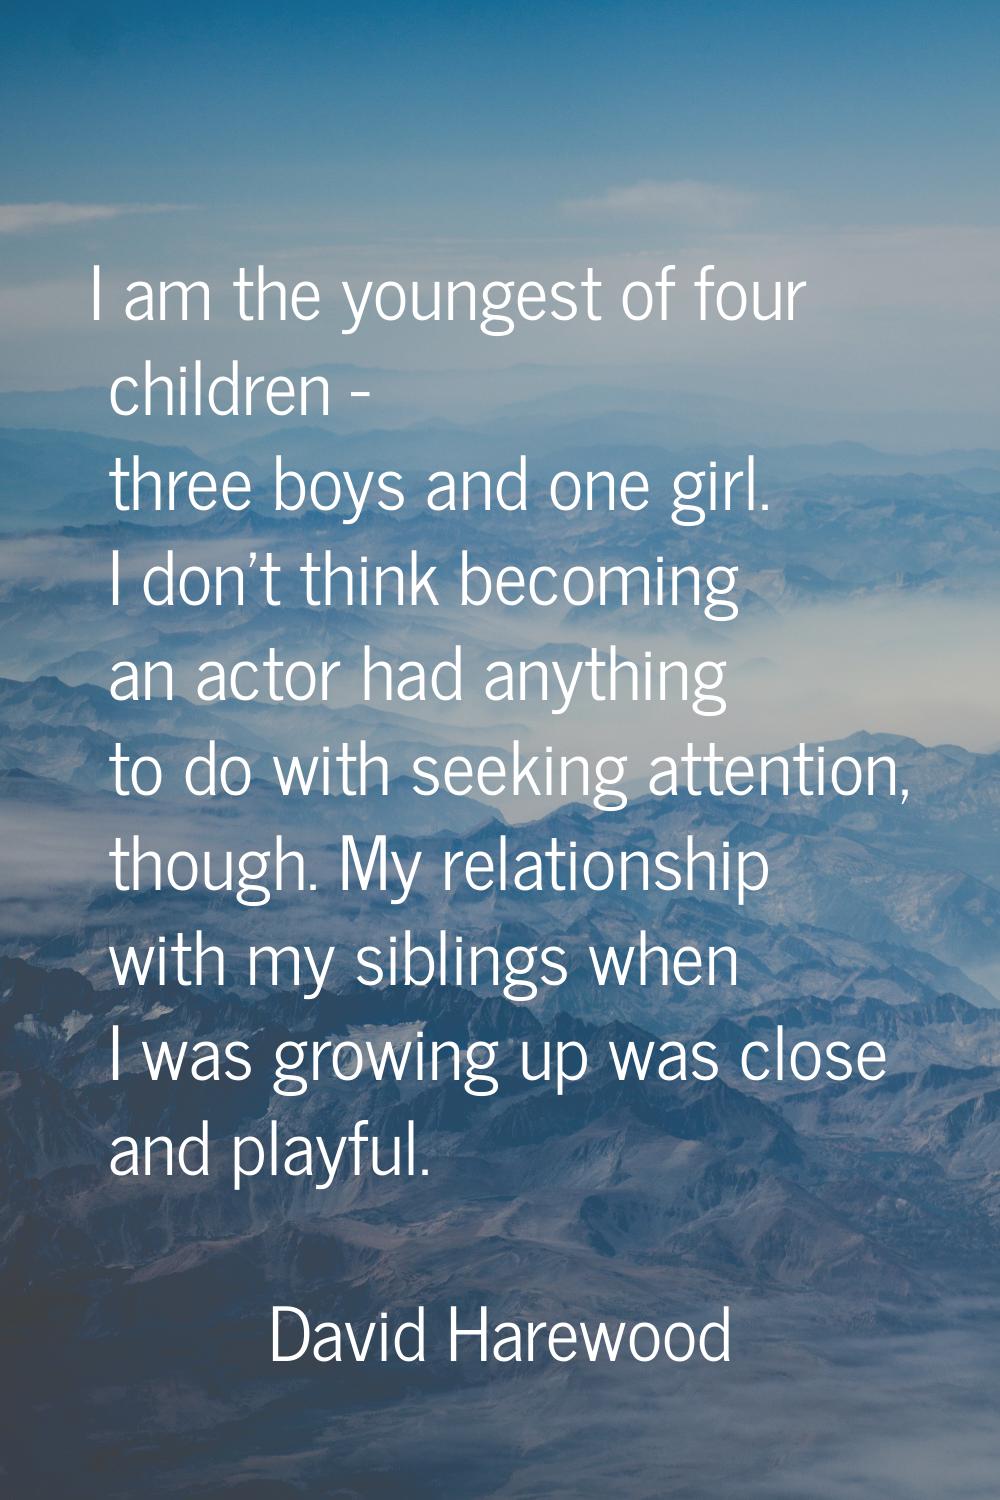 I am the youngest of four children - three boys and one girl. I don't think becoming an actor had a